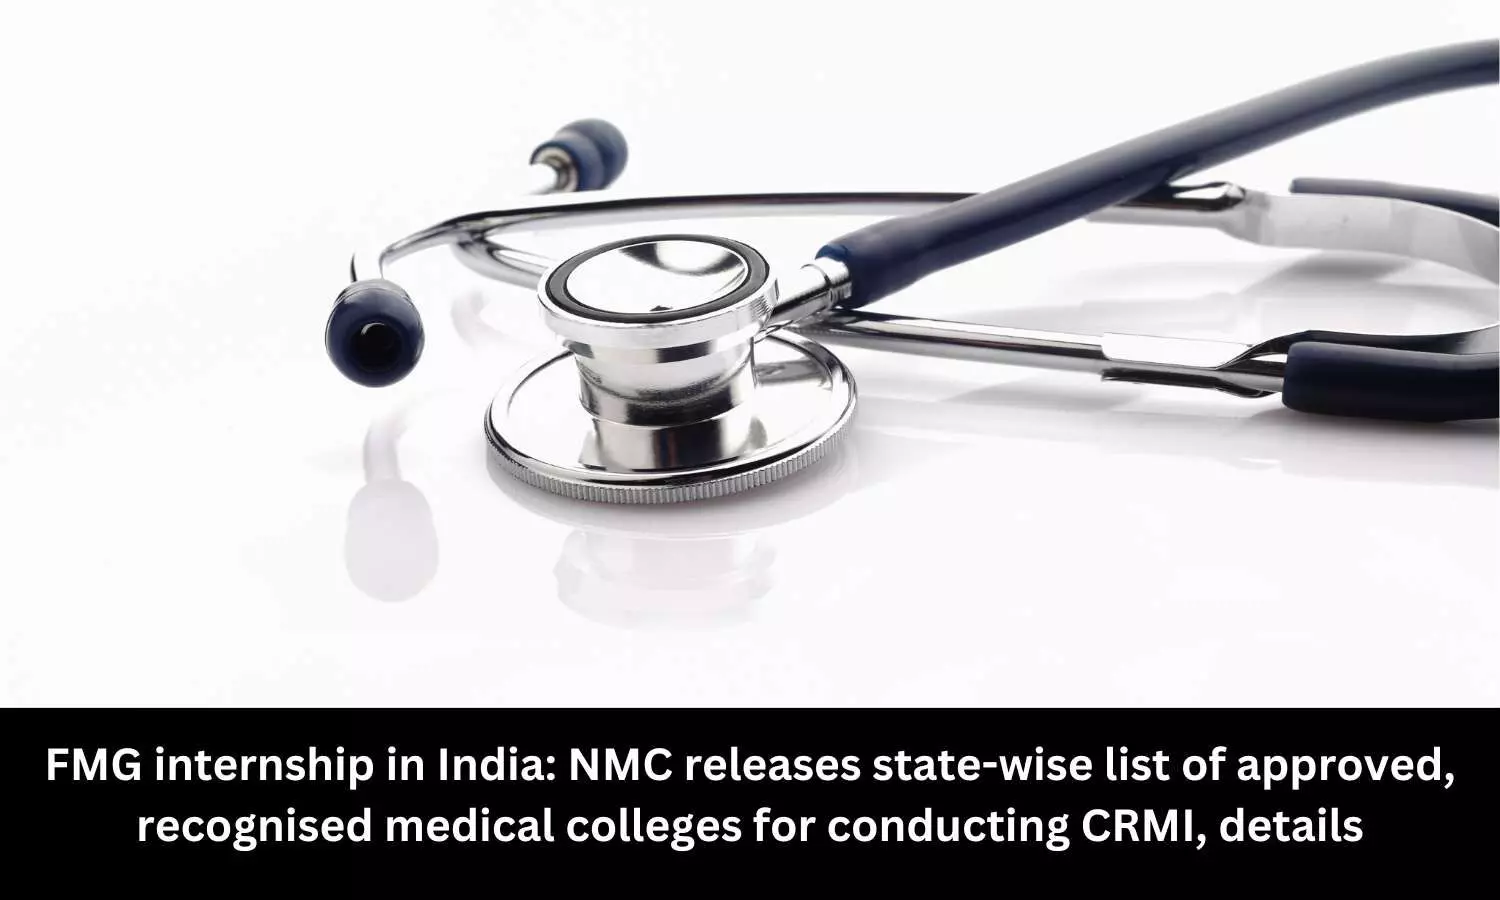 NMC releases state wise list of recognized, approved medical colleges for conducting CRMI for FMGs